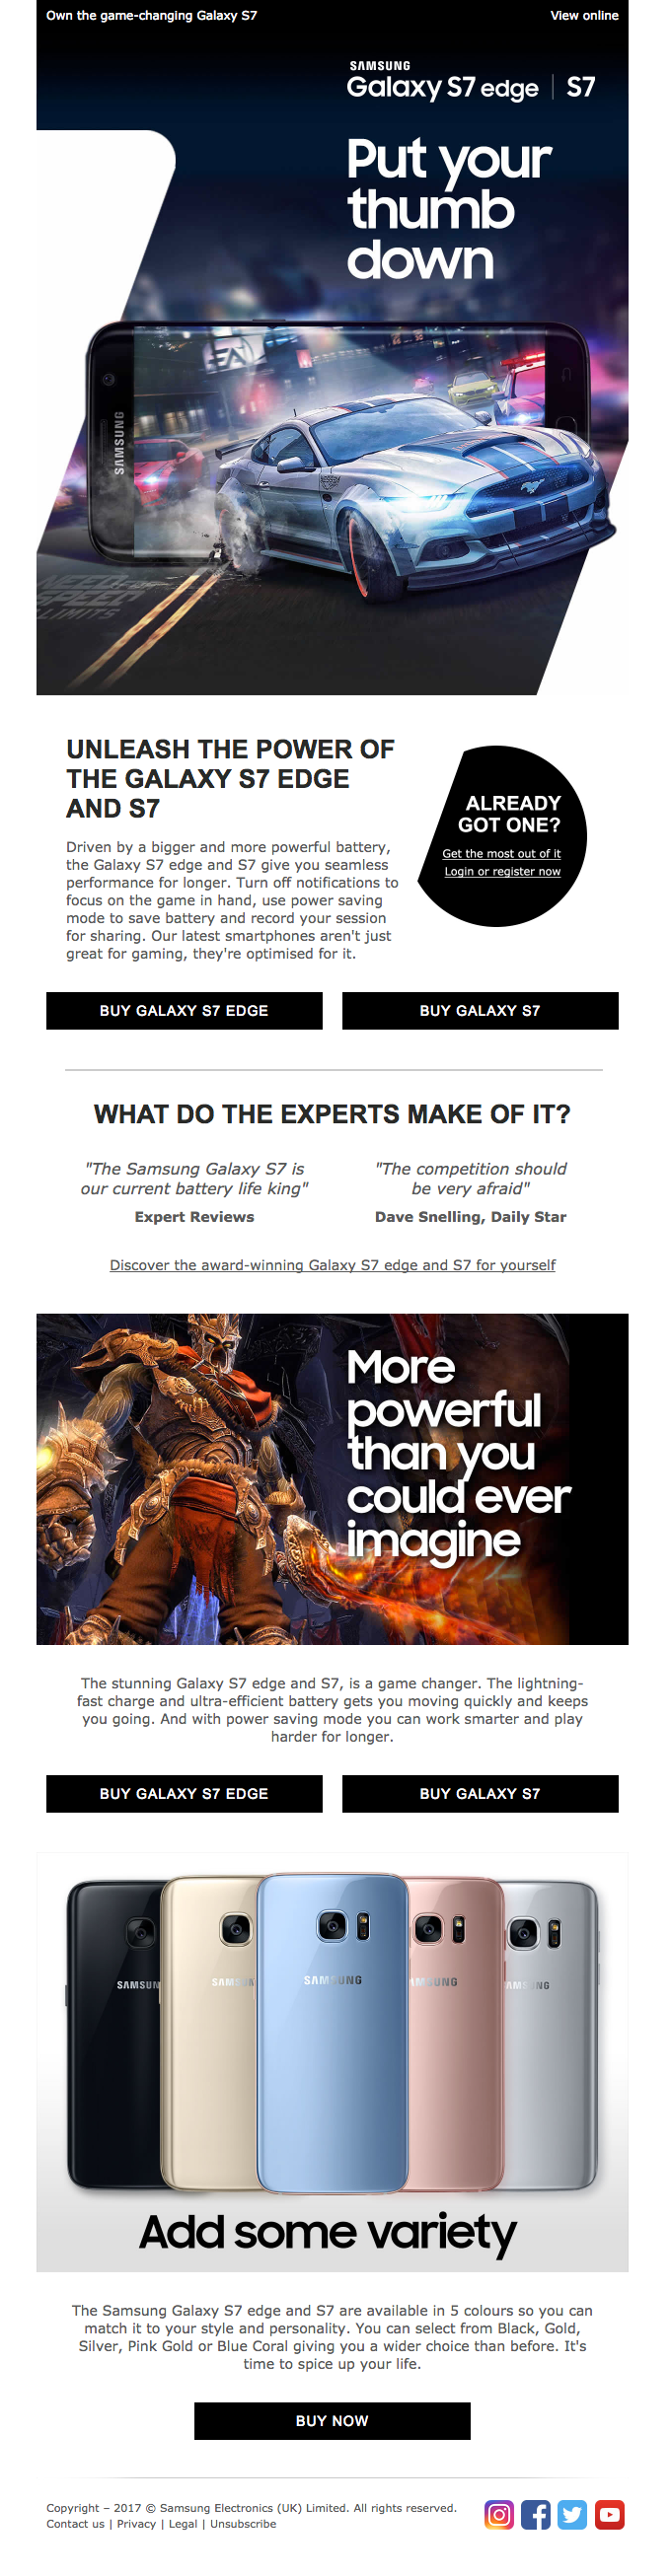 Now playing. The Galaxy S7 - Samsung Email Newsletter